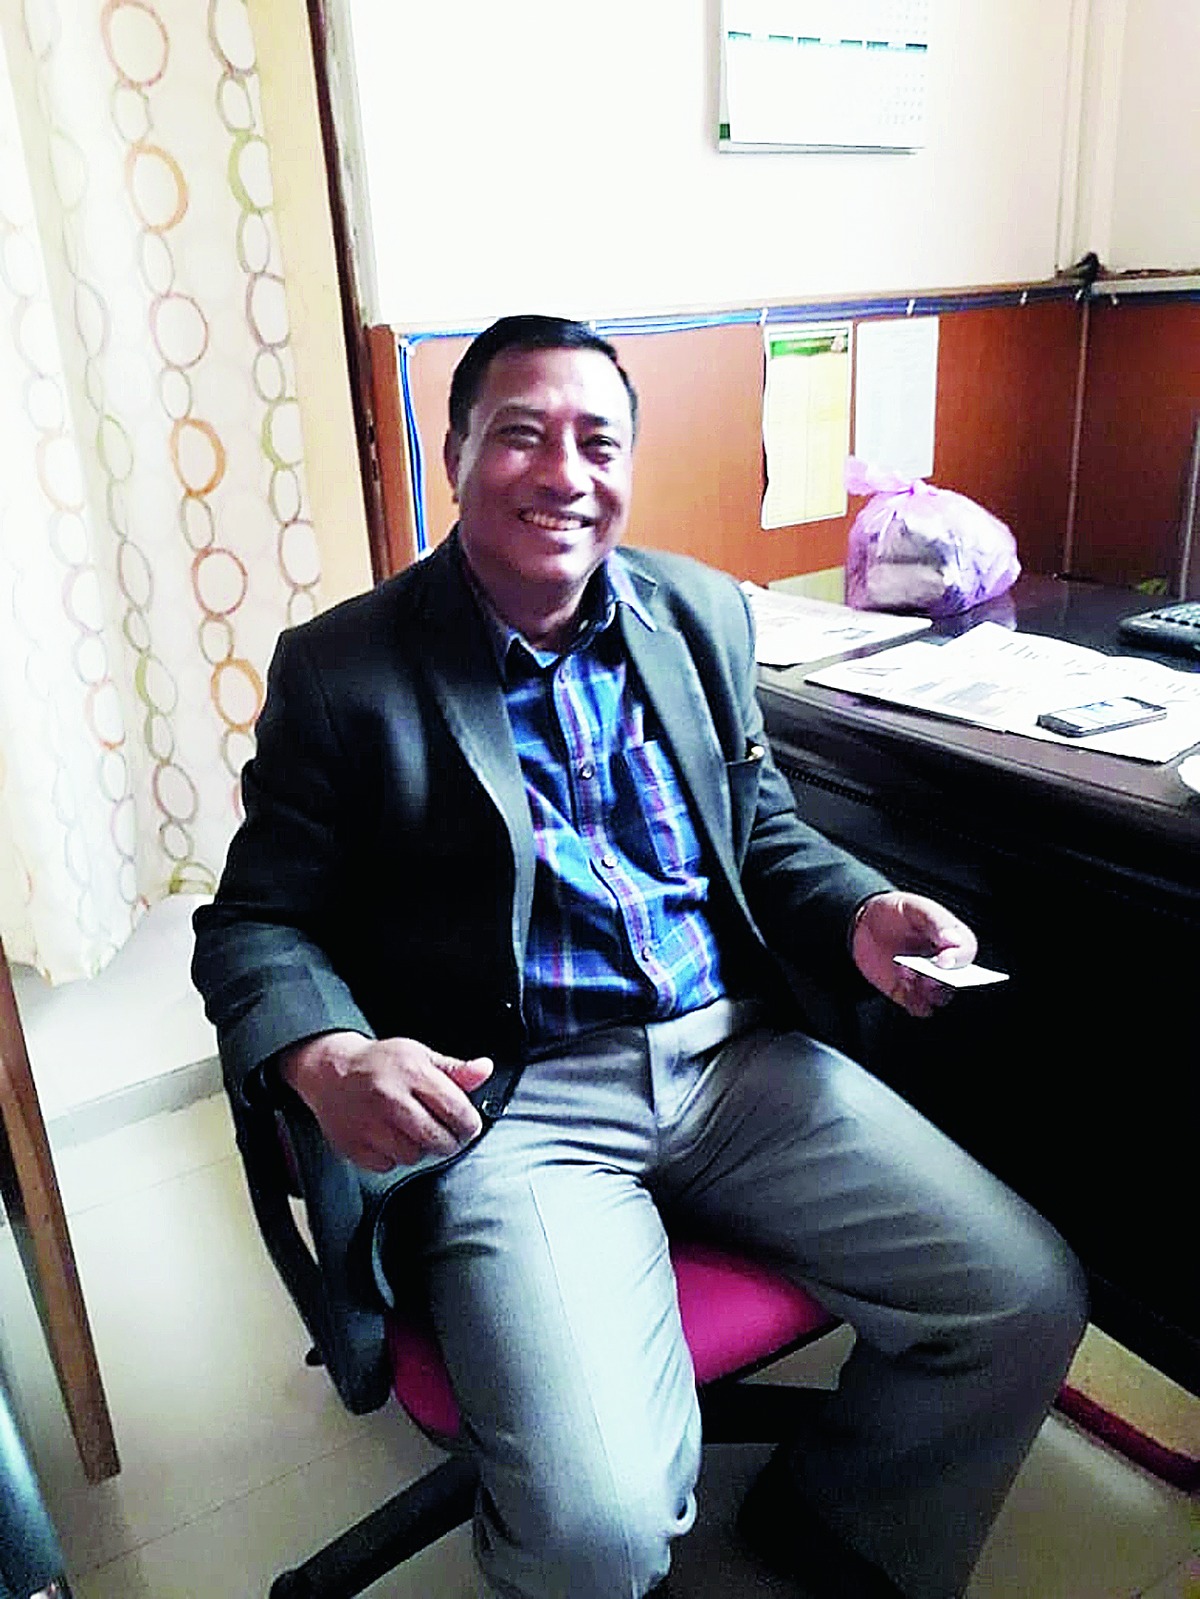 A.L. Hek is the BJP legislator and part of the Meghalaya Democratic Alliance (MDA) government